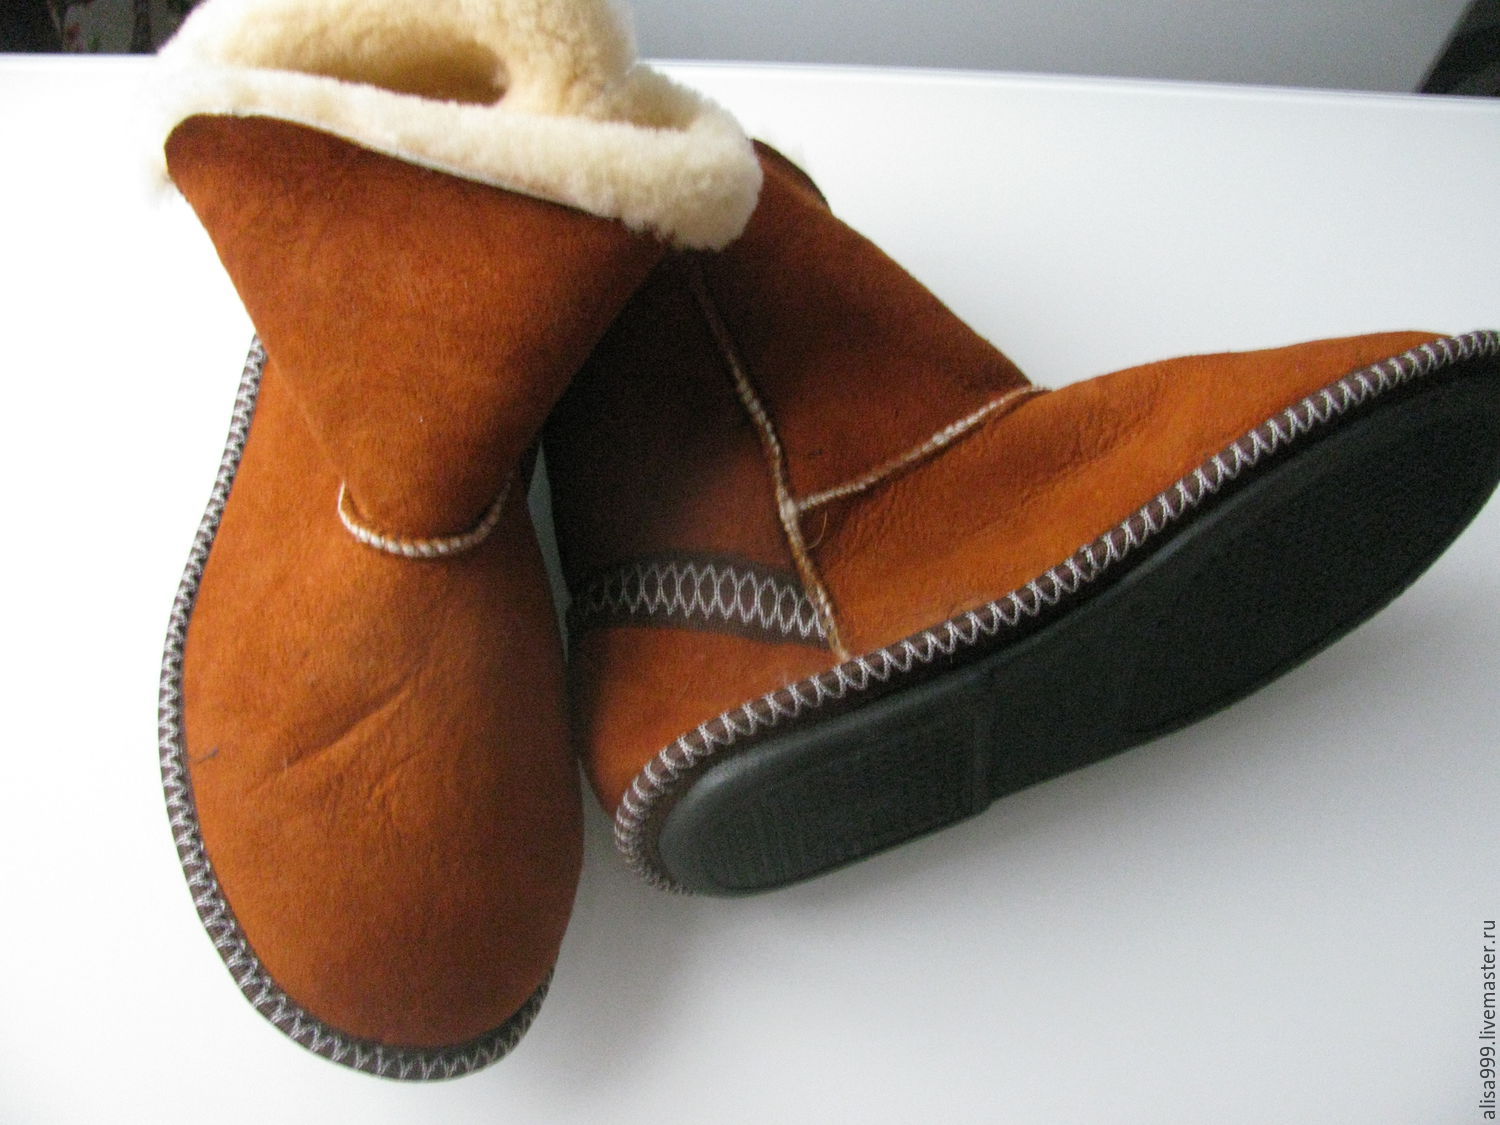 Sheep fur ugg boots are homemade, Ugg boots, Moscow,  Фото №1